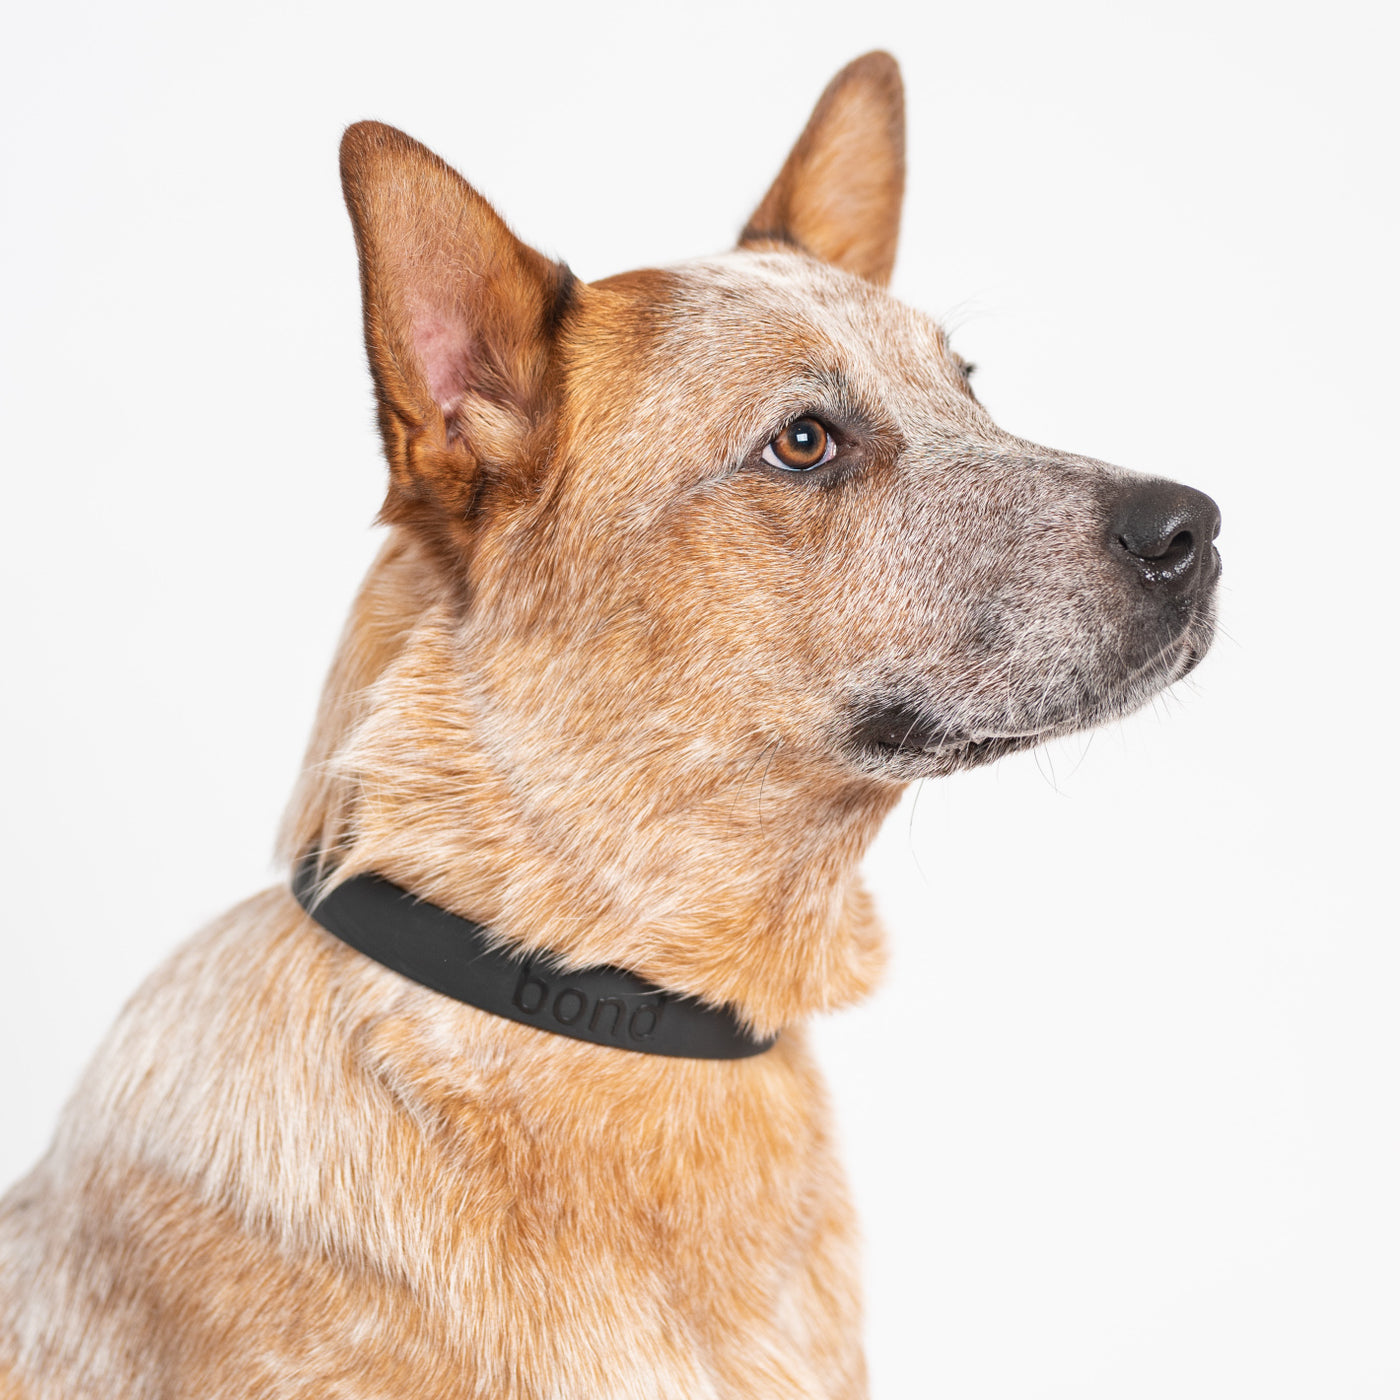 Mixed breed dog posing with black collar